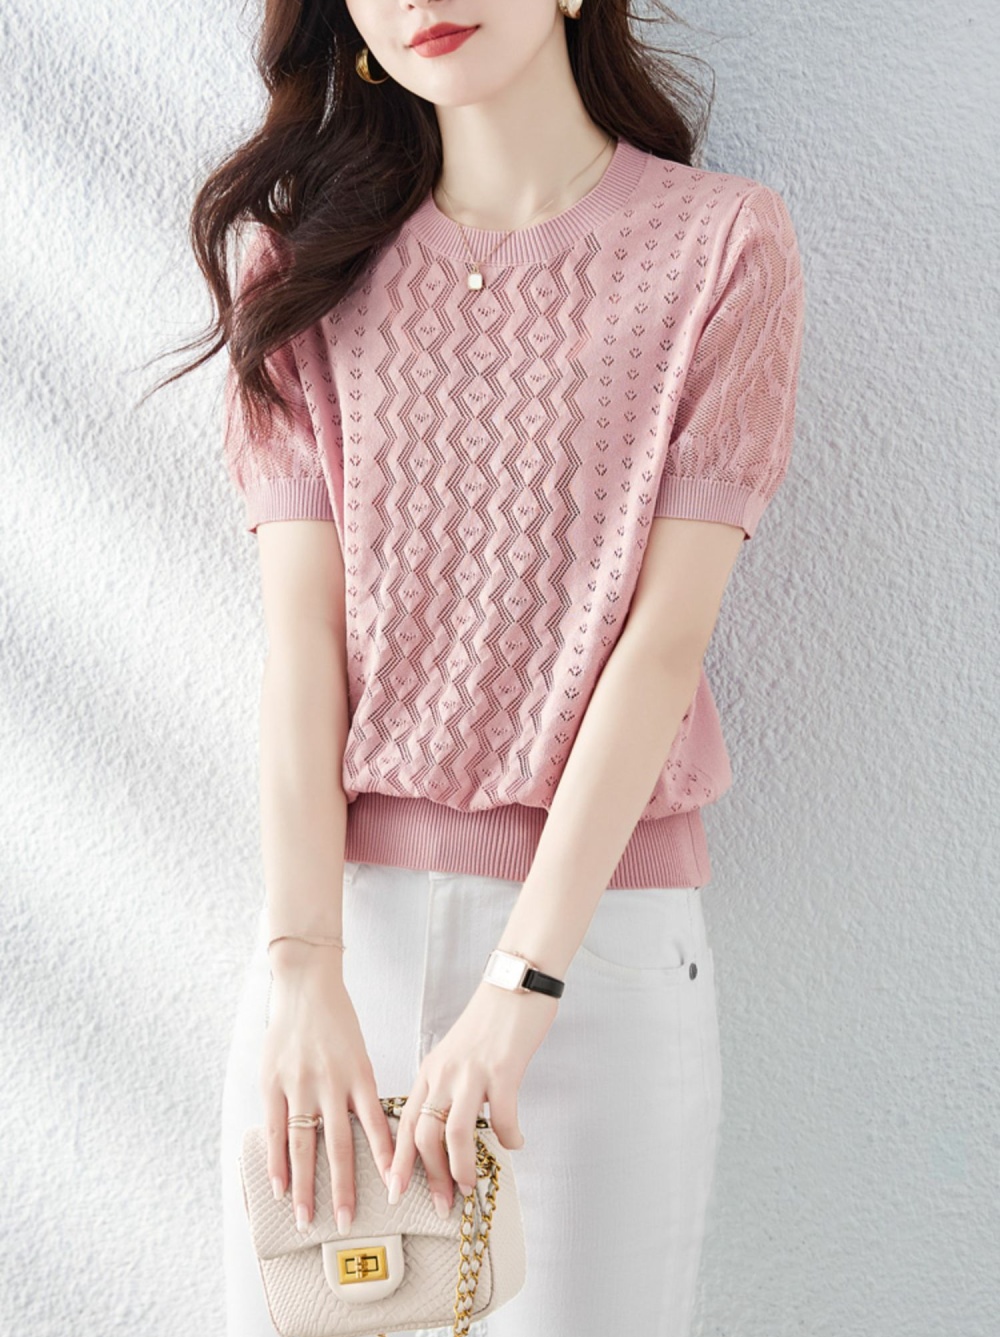 Short sleeve tops simple sweater for women